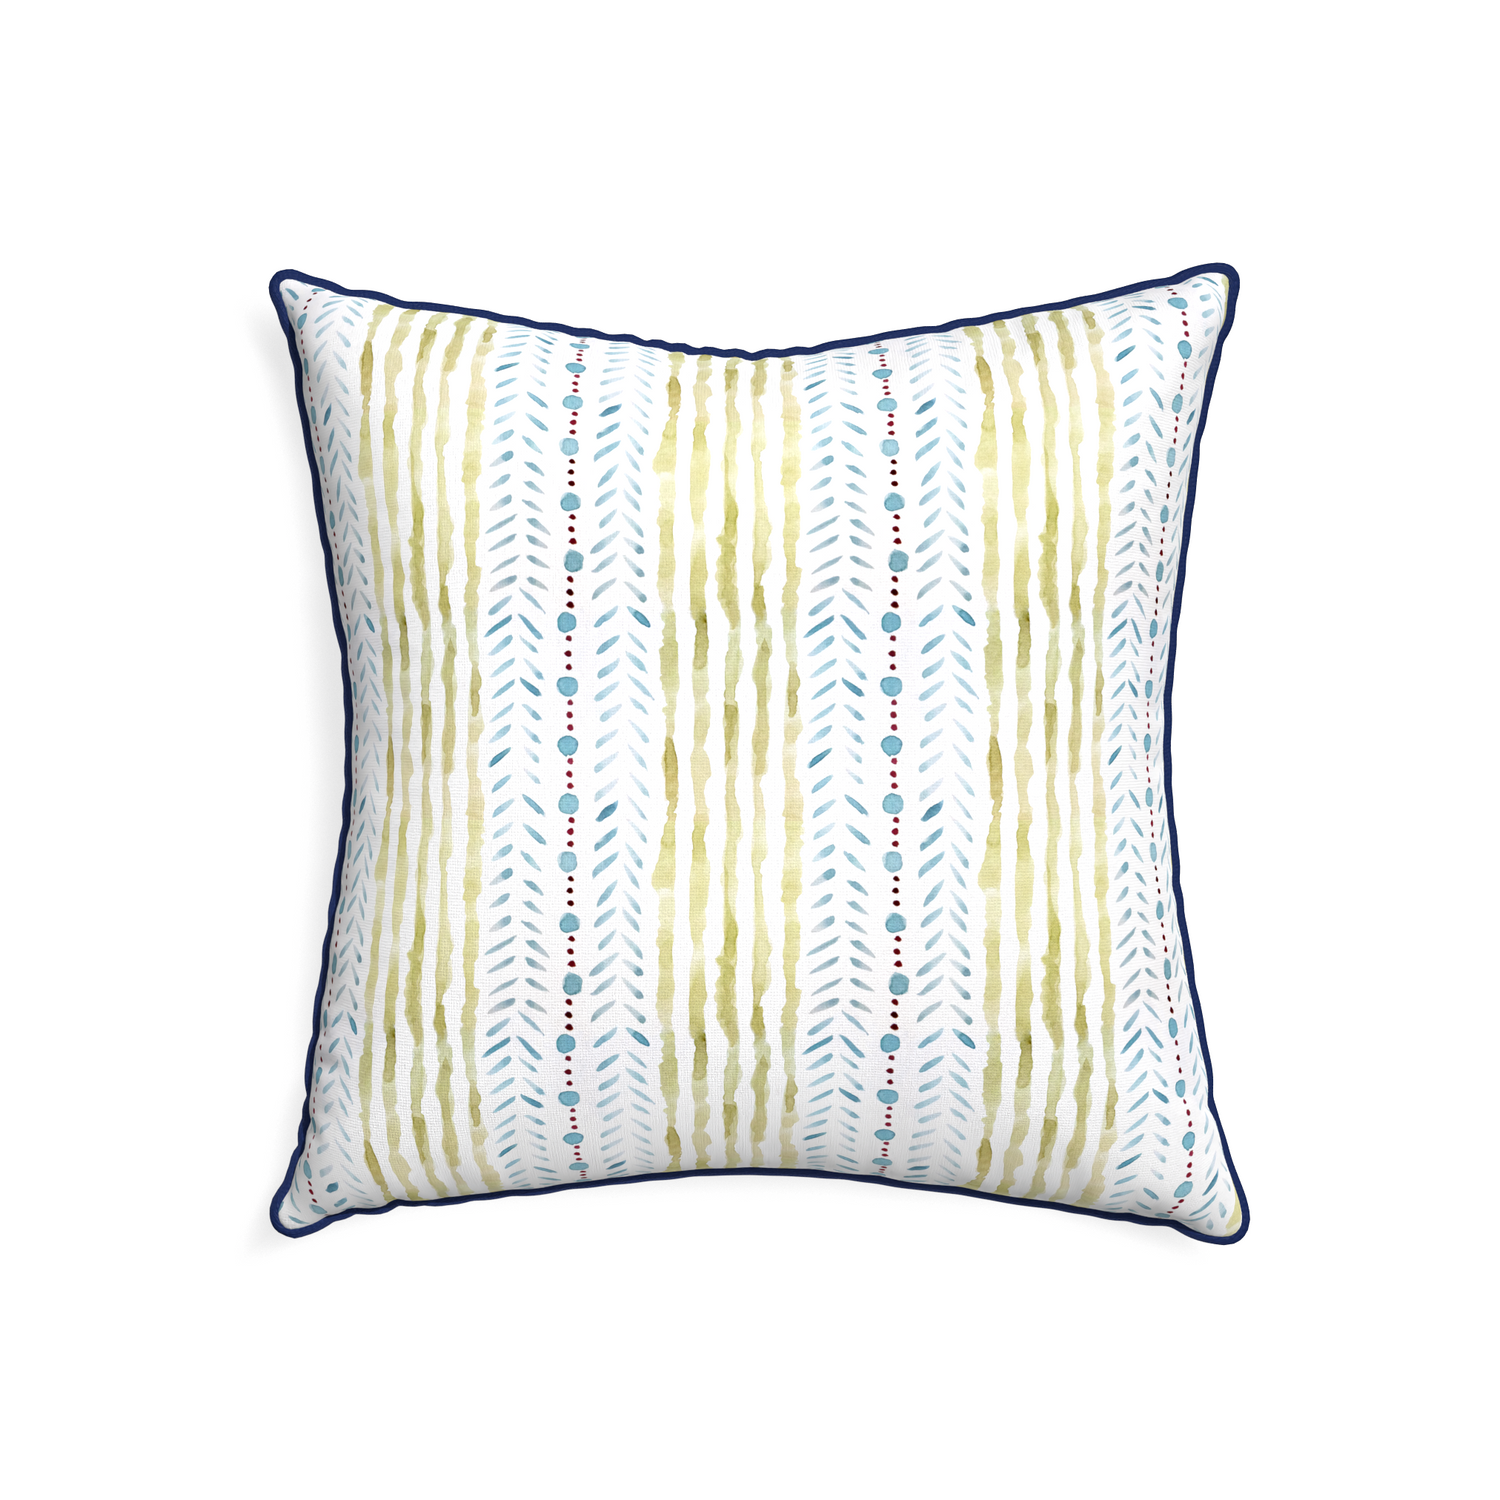 22-square julia custom blue & green stripedpillow with midnight piping on white background